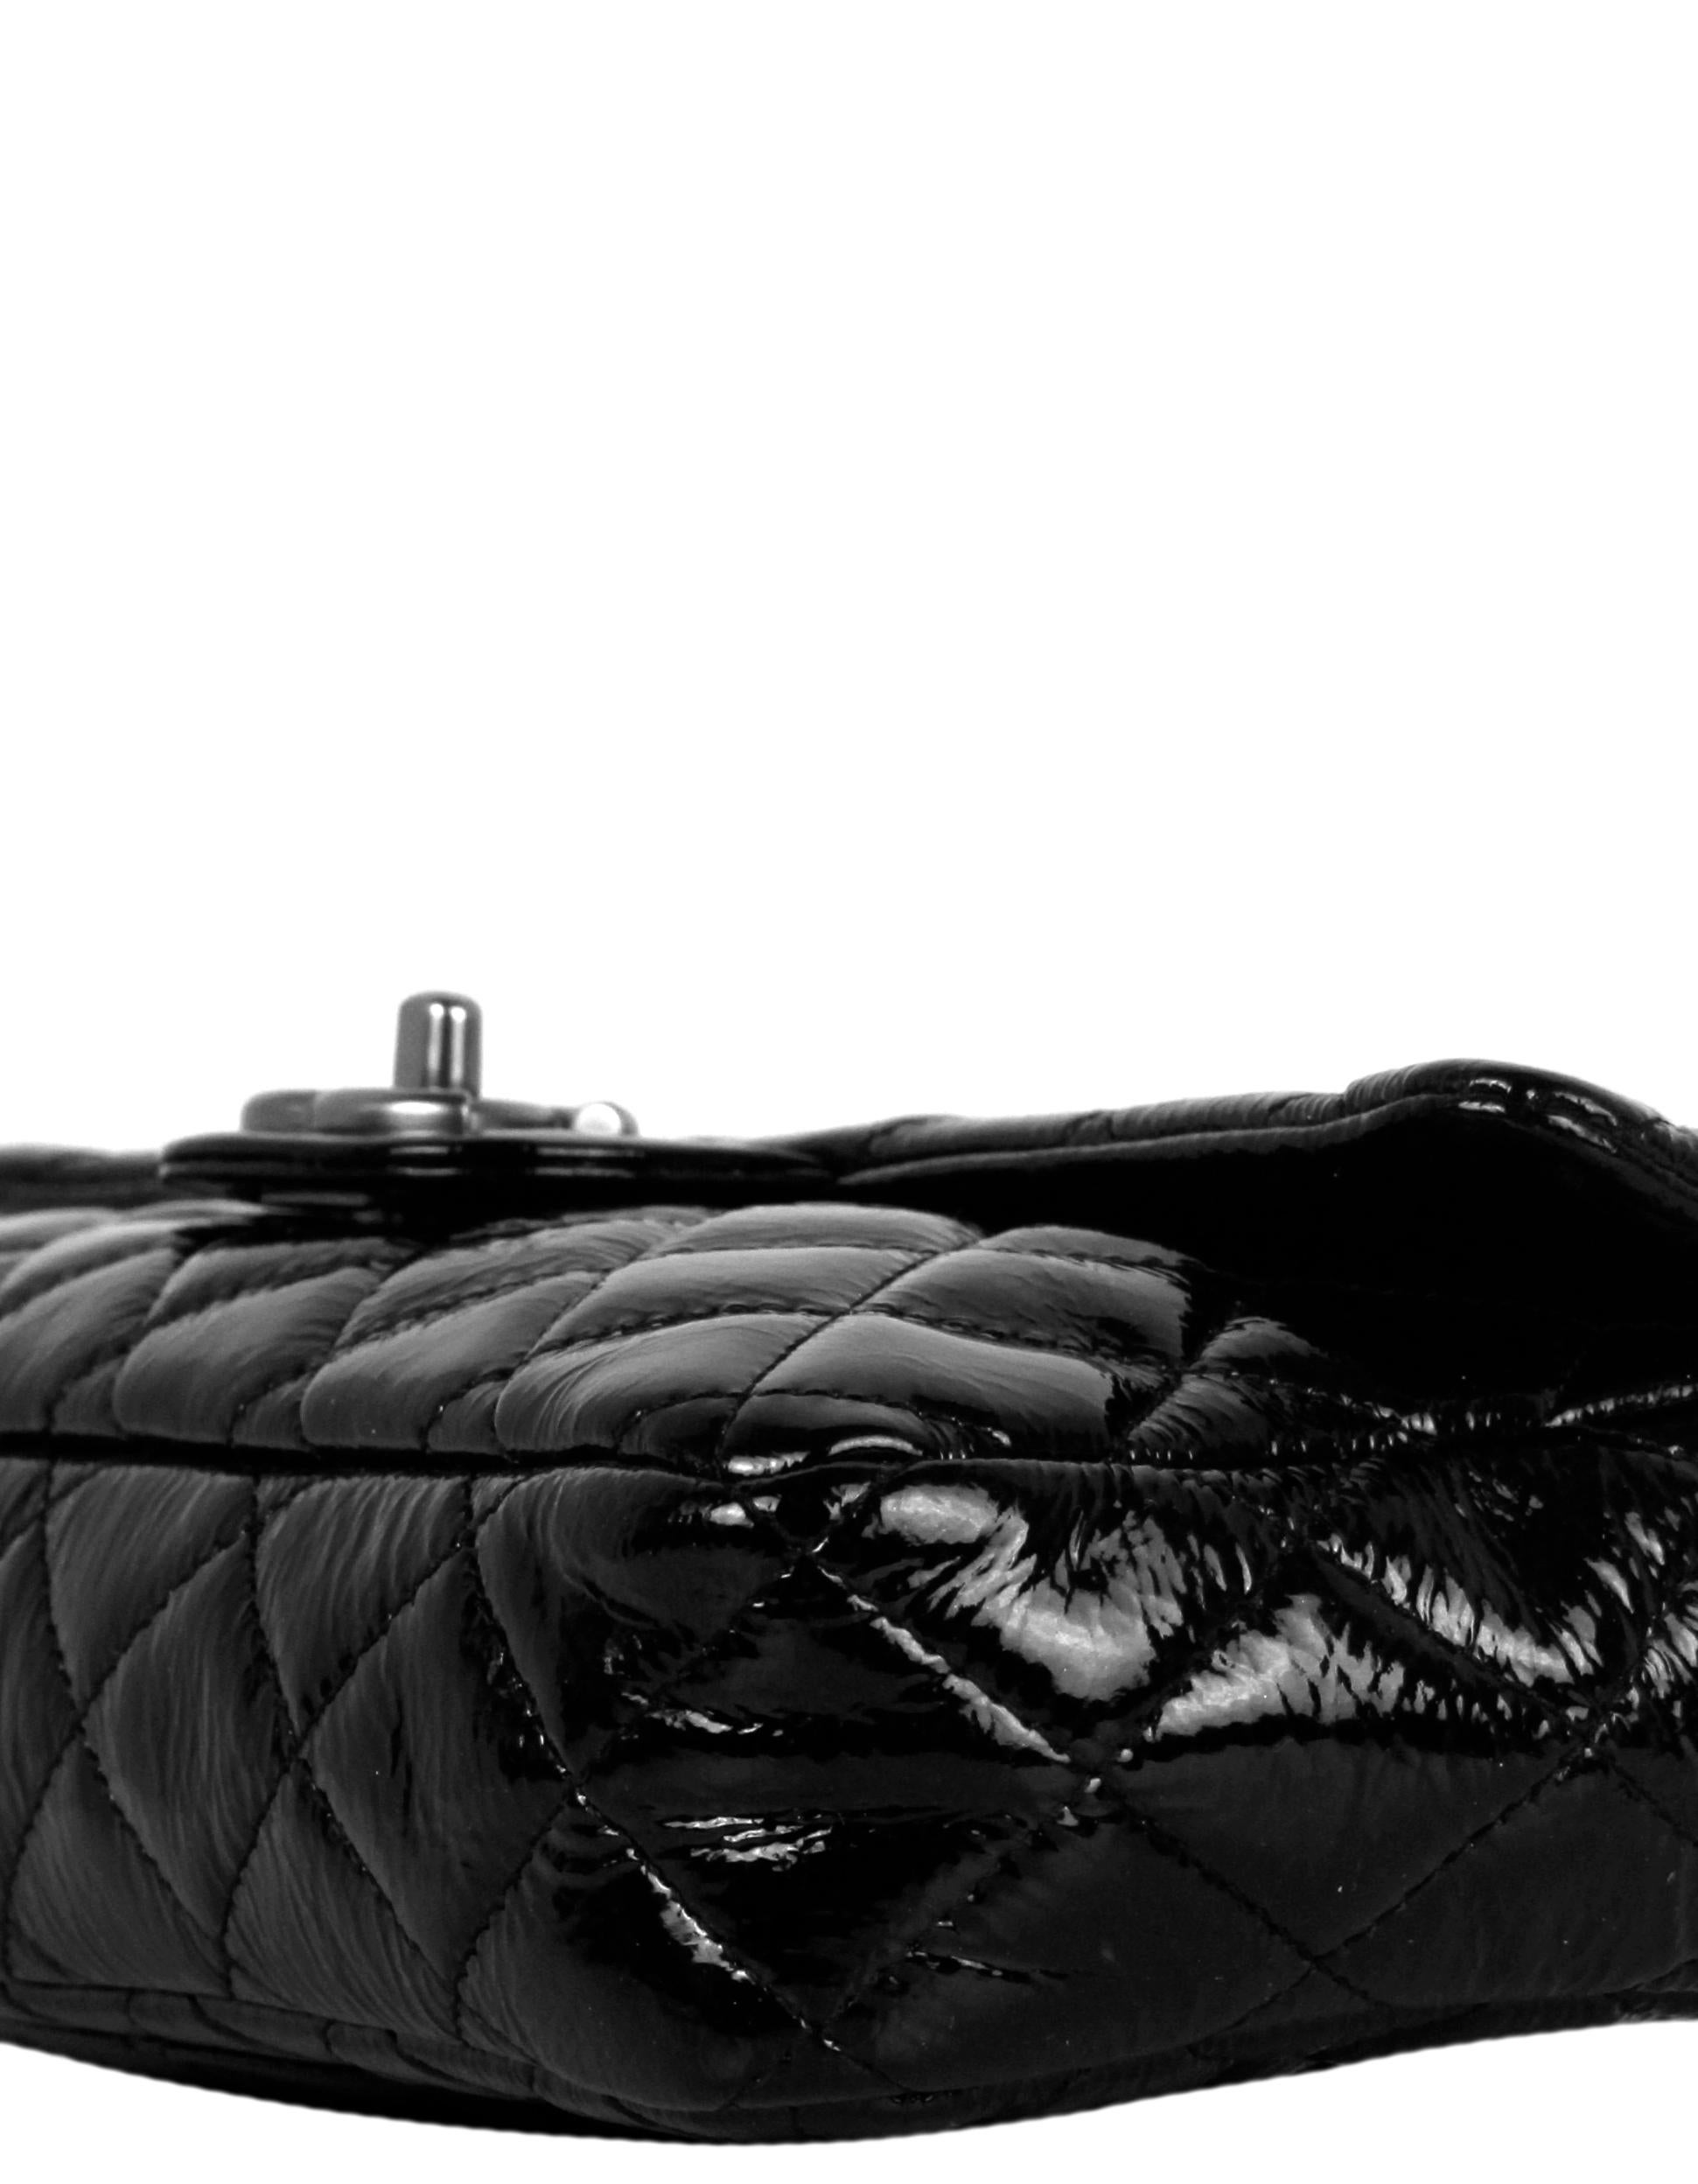 Chanel Black Distressed Patent Quilted East West Flap Bag 2